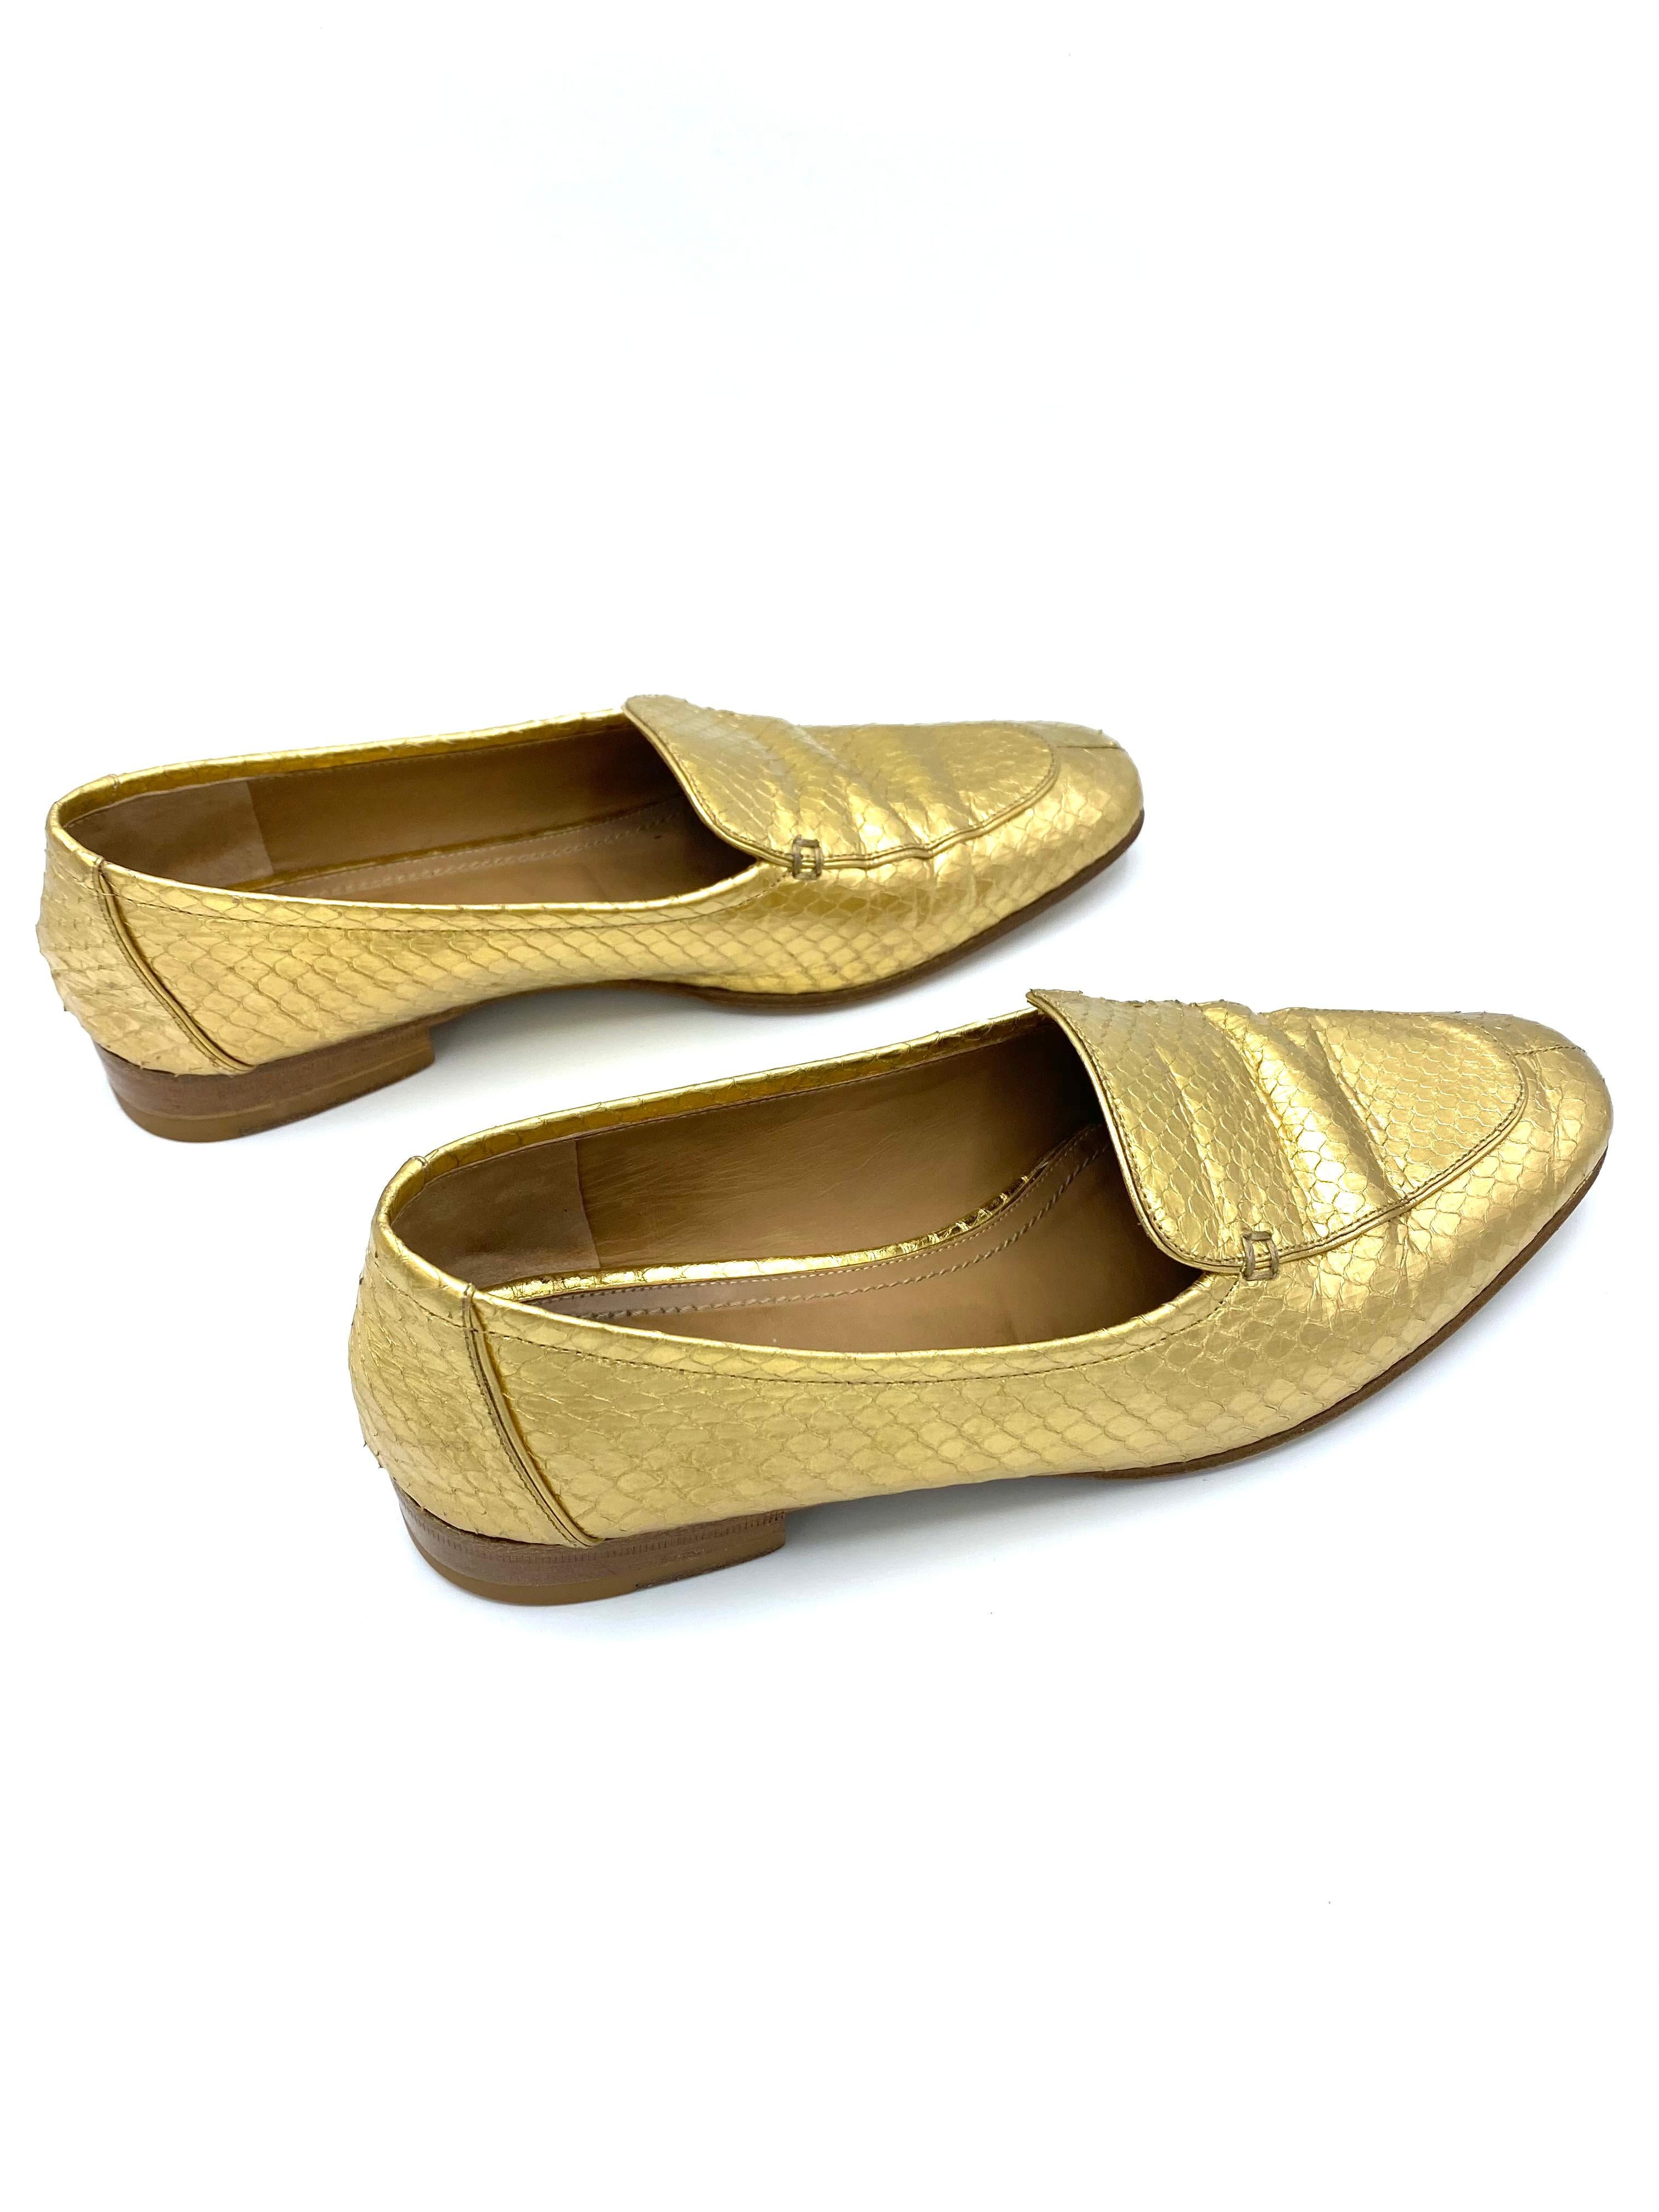 The Row Adam Mocassin Gold Watersnake Flat Shoes Size 39 In Excellent Condition For Sale In Beverly Hills, CA